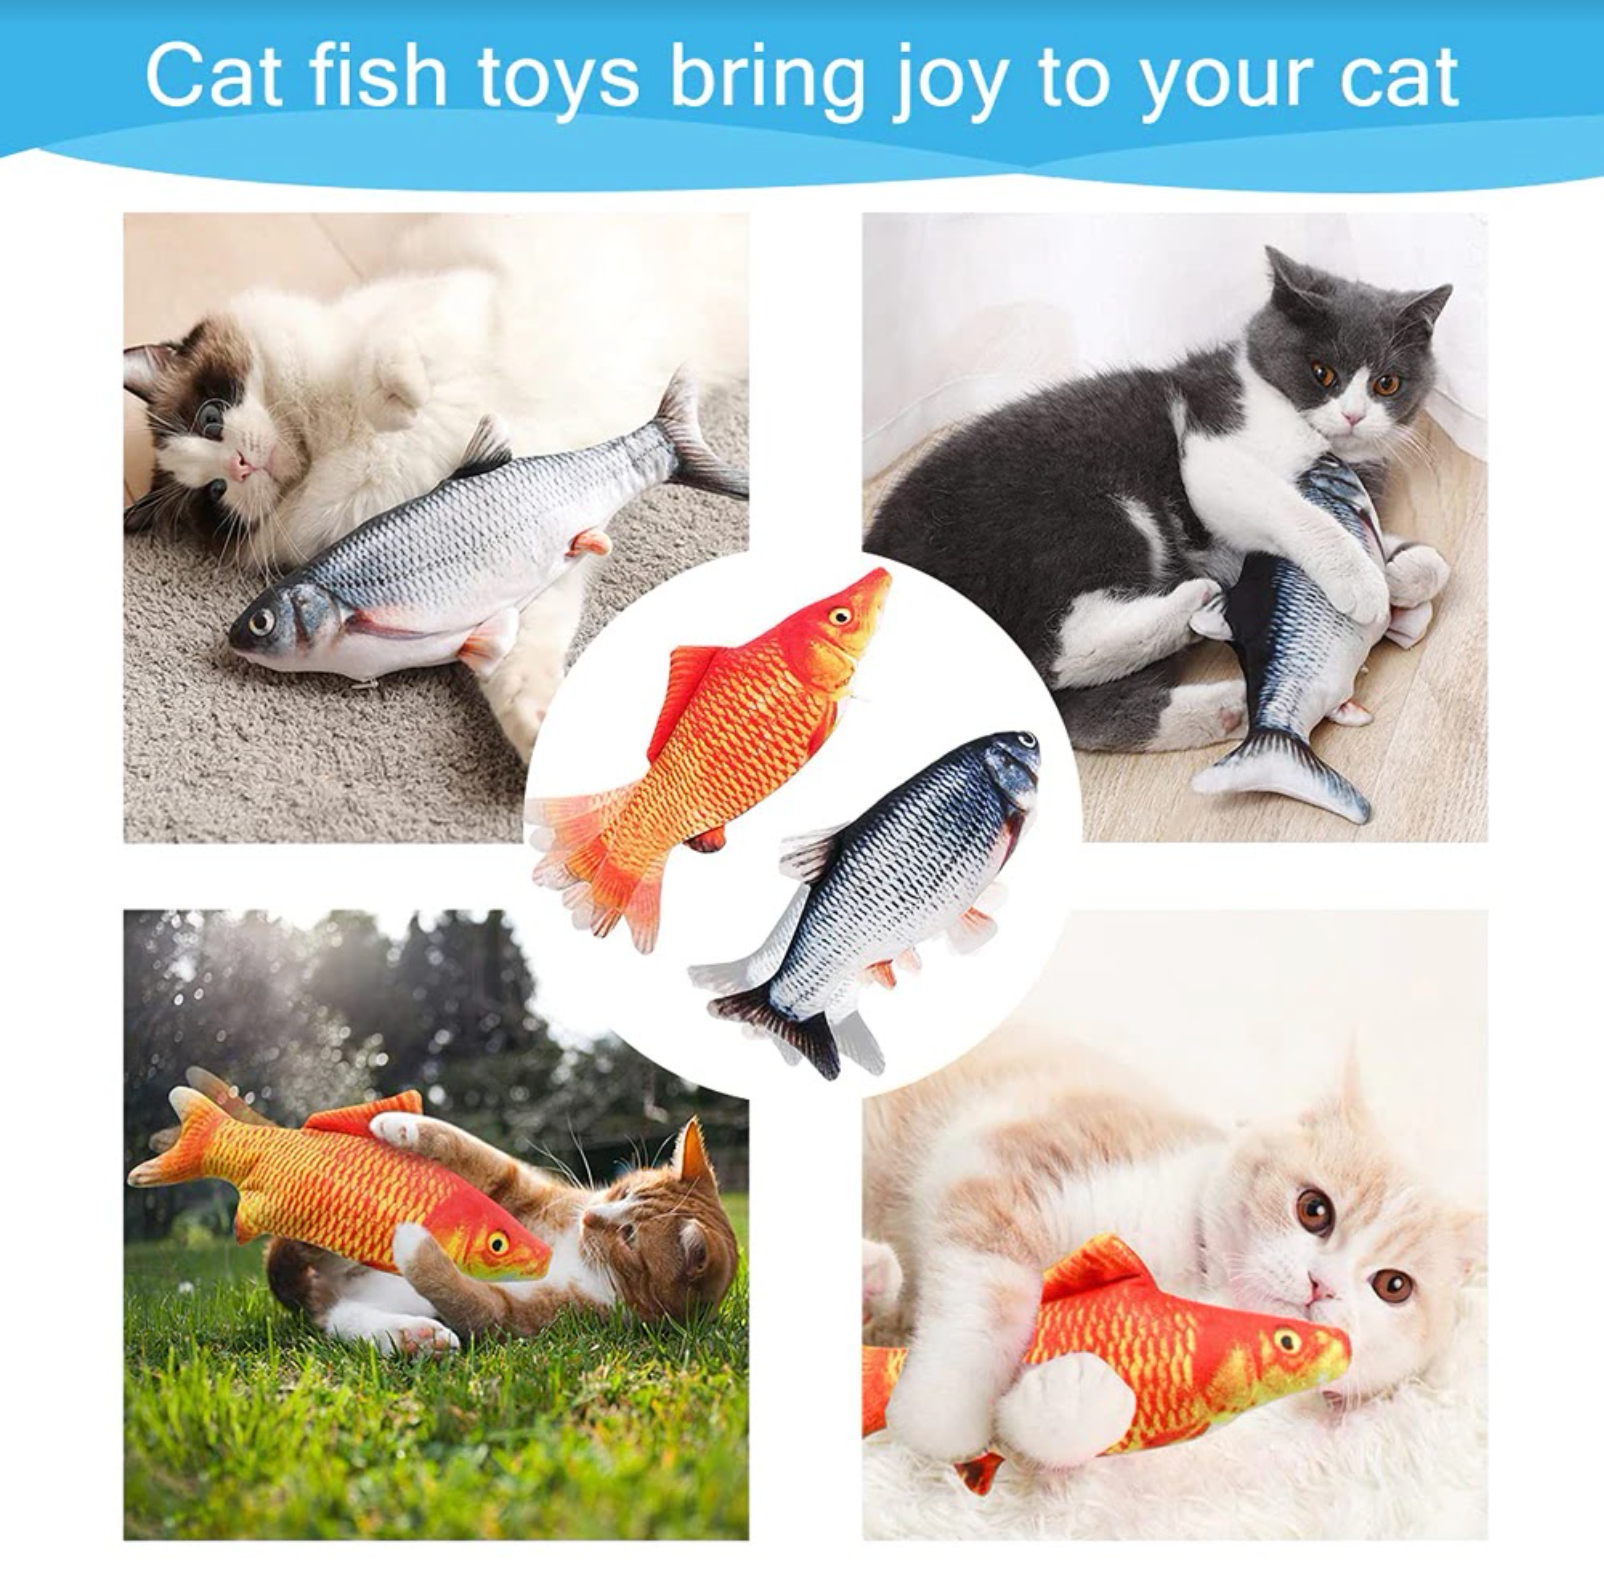 New pet cat toy flying fish replacement head funny cat stick cat